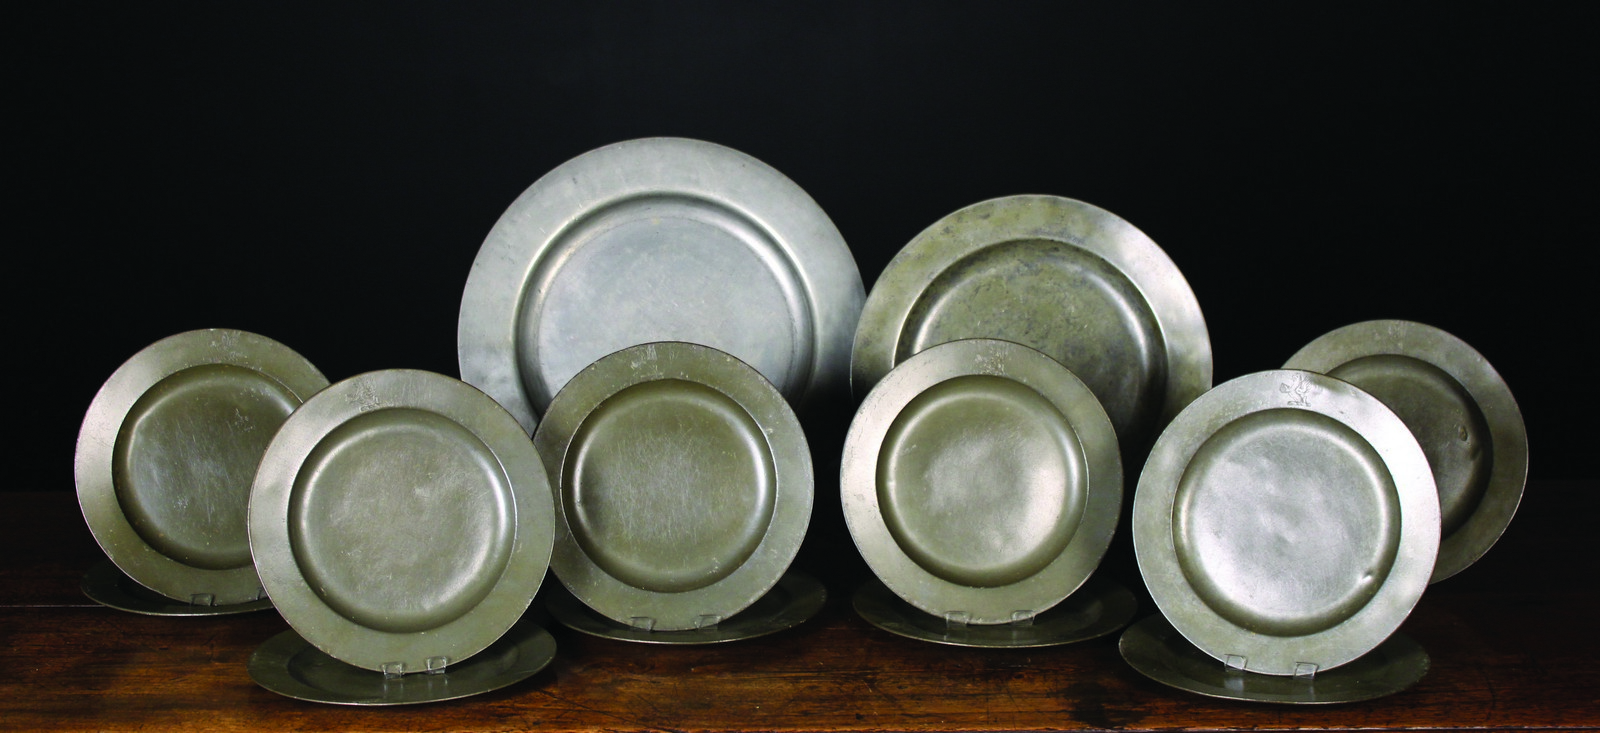 A Collection of 18th Century London Pewter Plates: Eleven dinner plates with Thomas Wheeler's touch